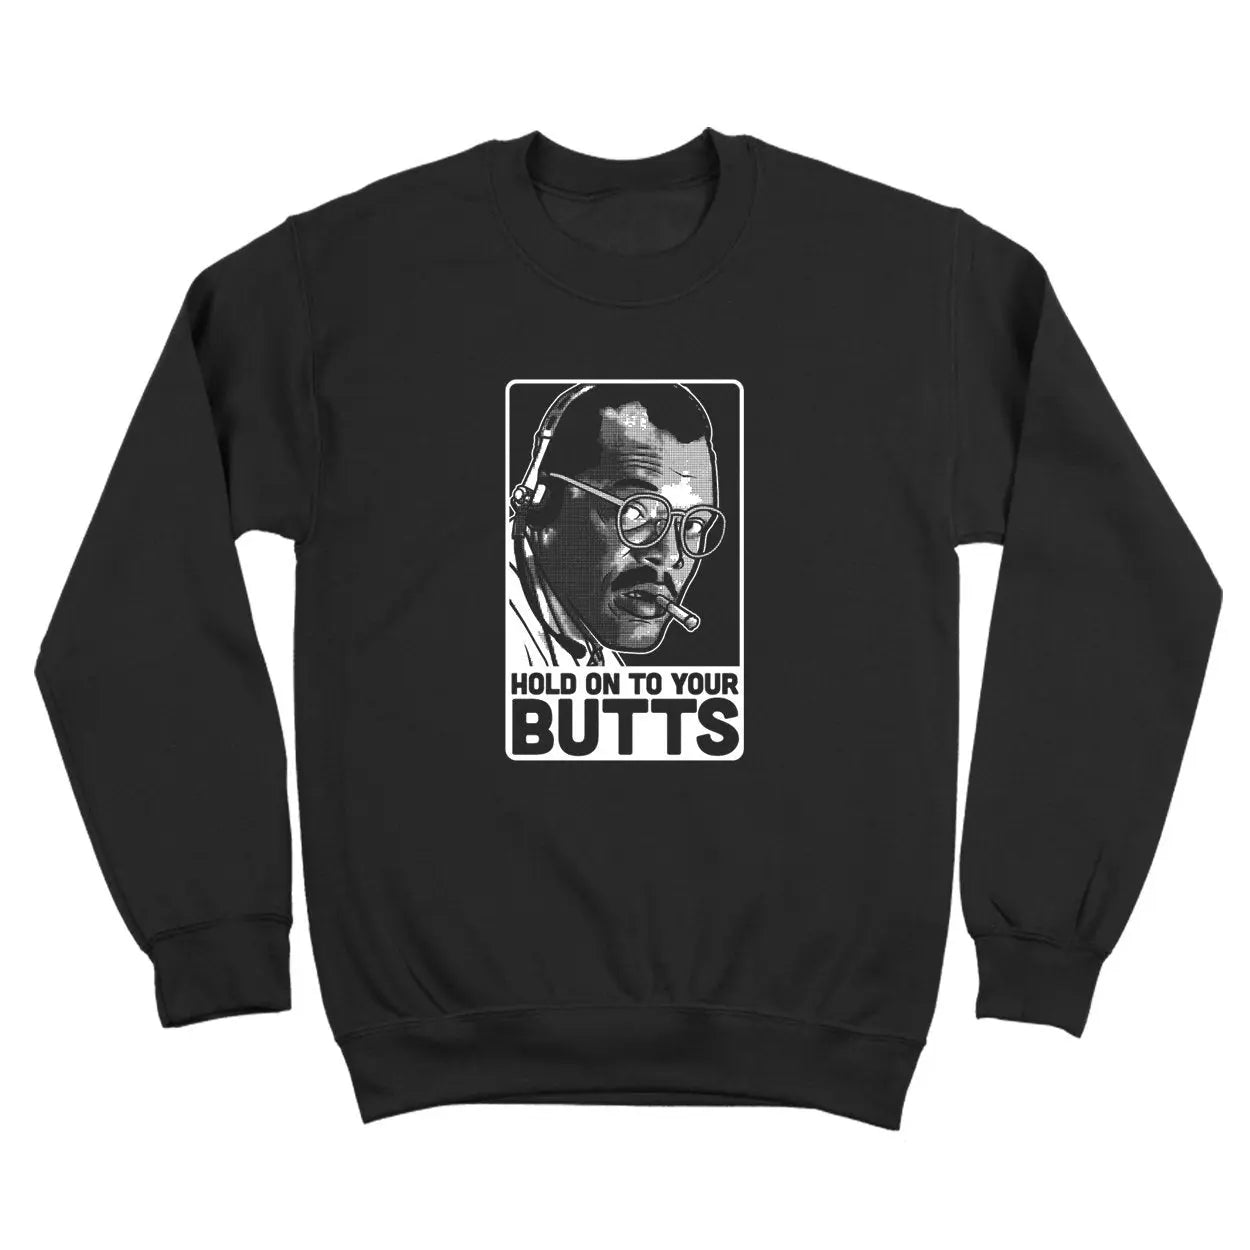 Hold On To Your Butts Tshirt - Donkey Tees